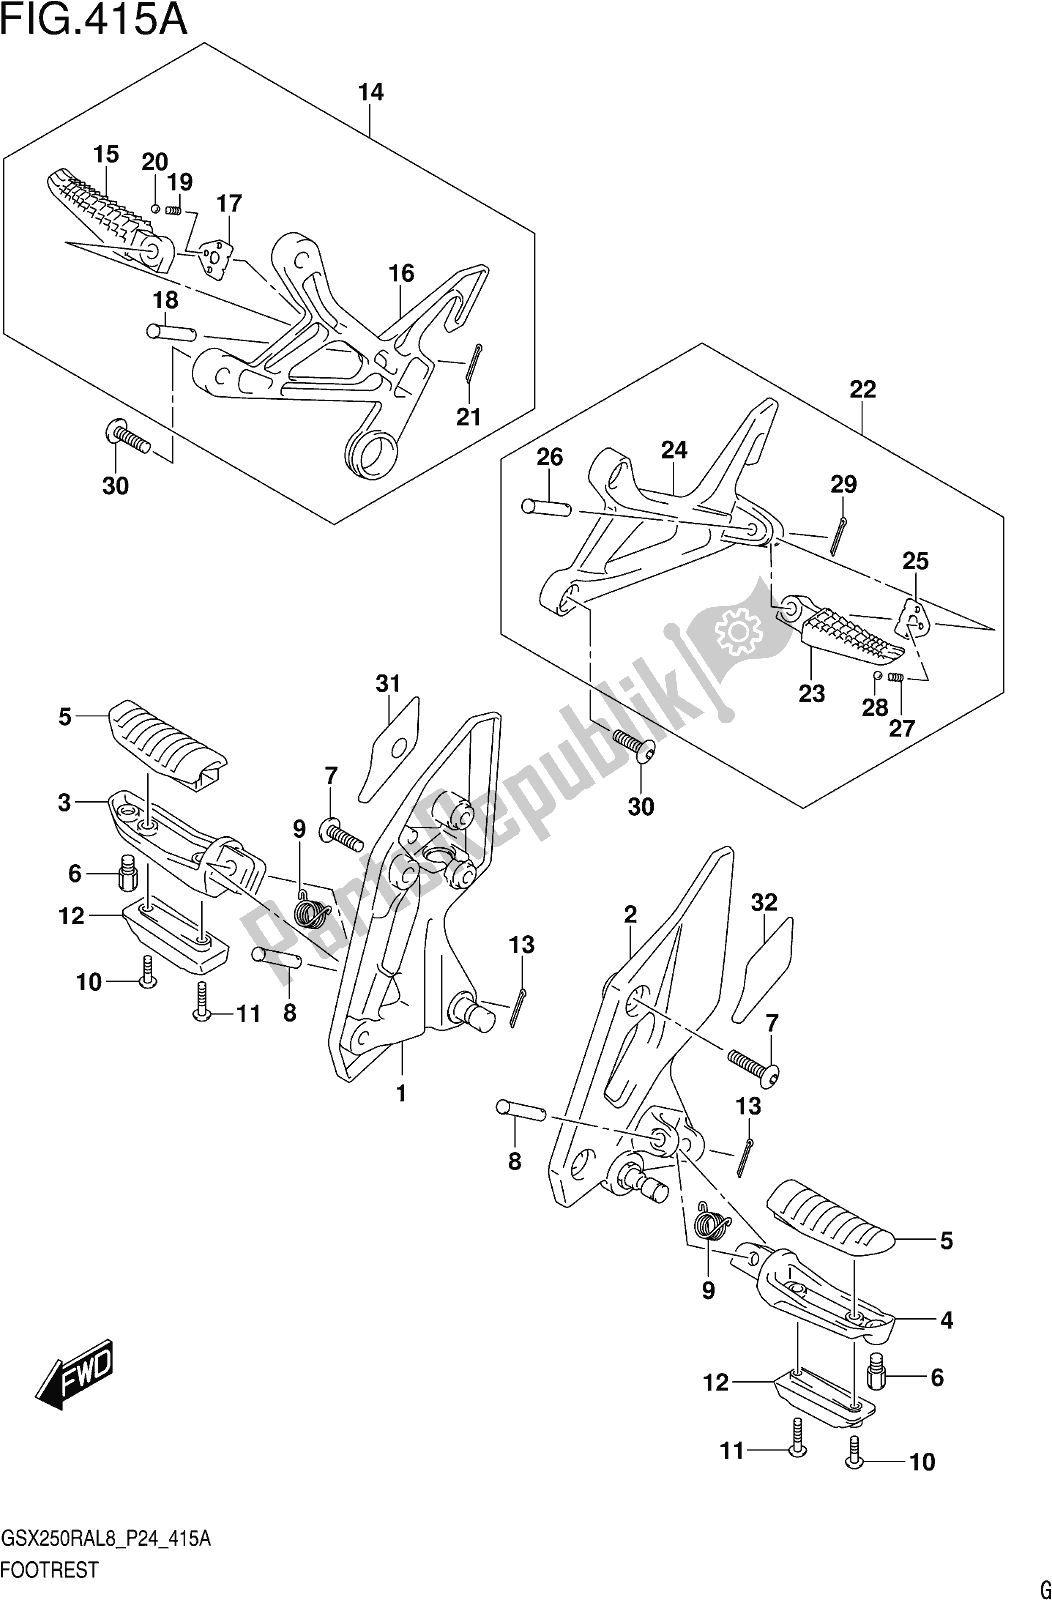 All parts for the Fig. 415a Footrest of the Suzuki GW 250 RAZ 2018